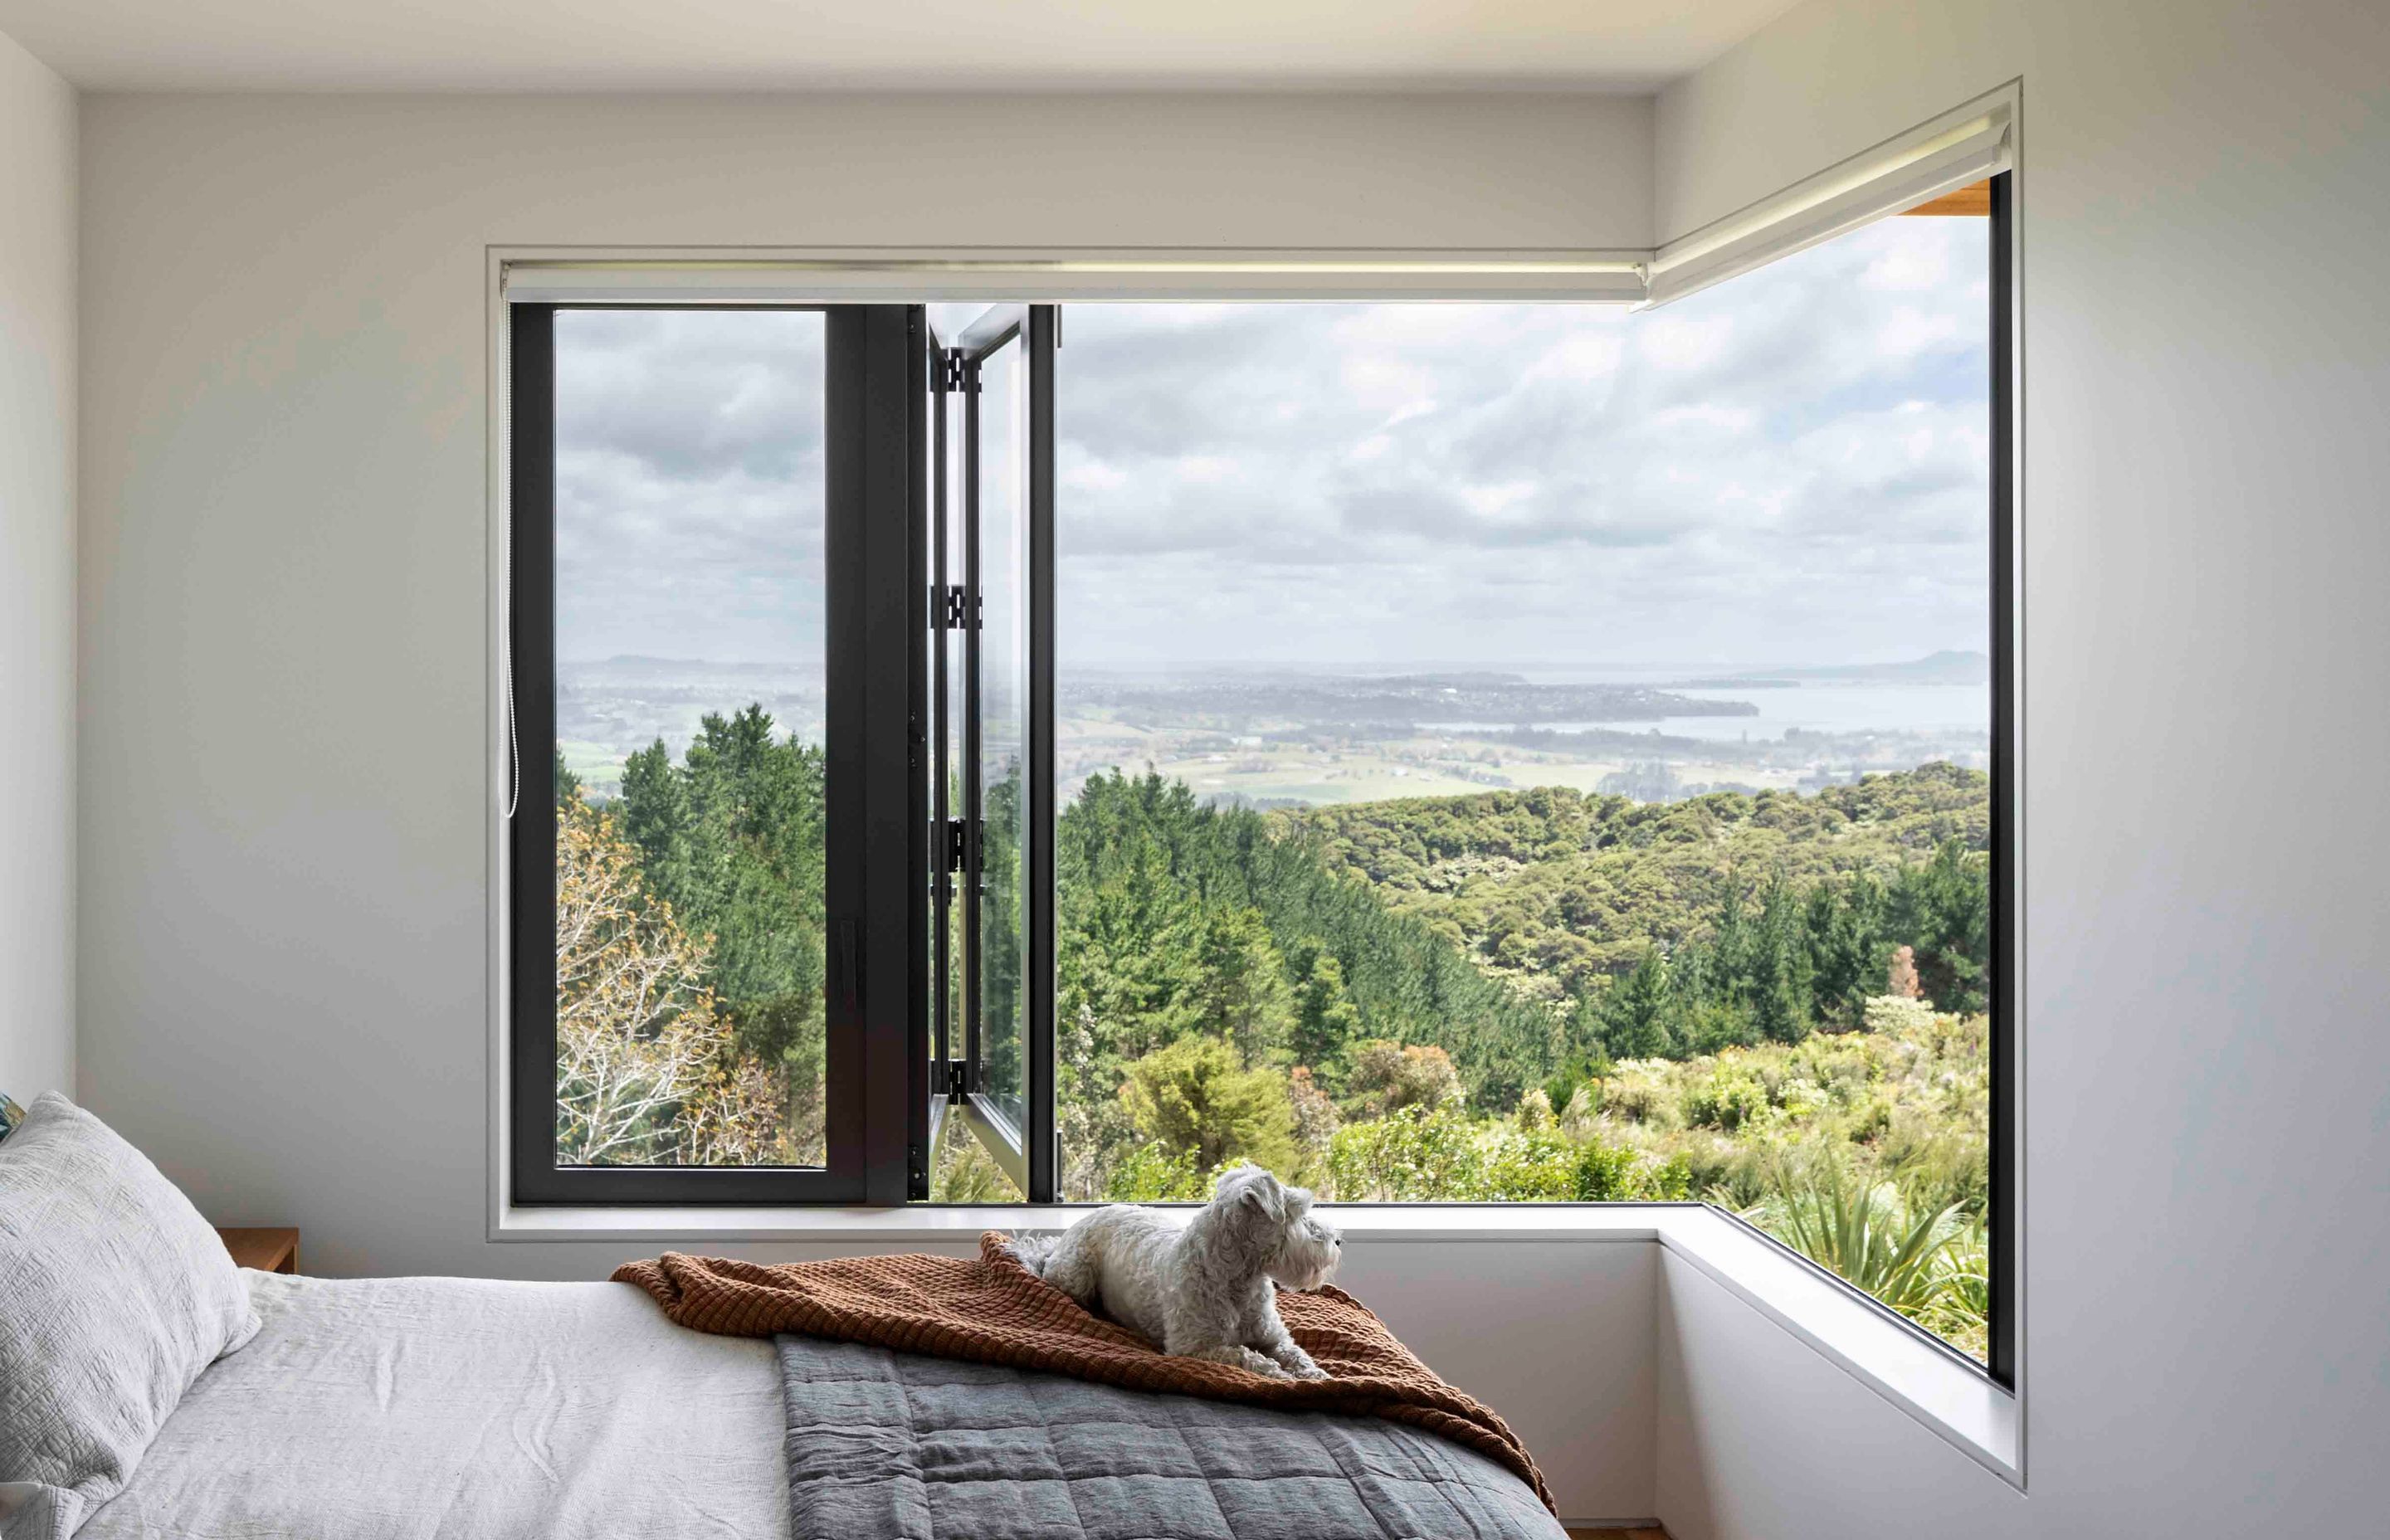 Each bedroom captures its own special slice of the view.